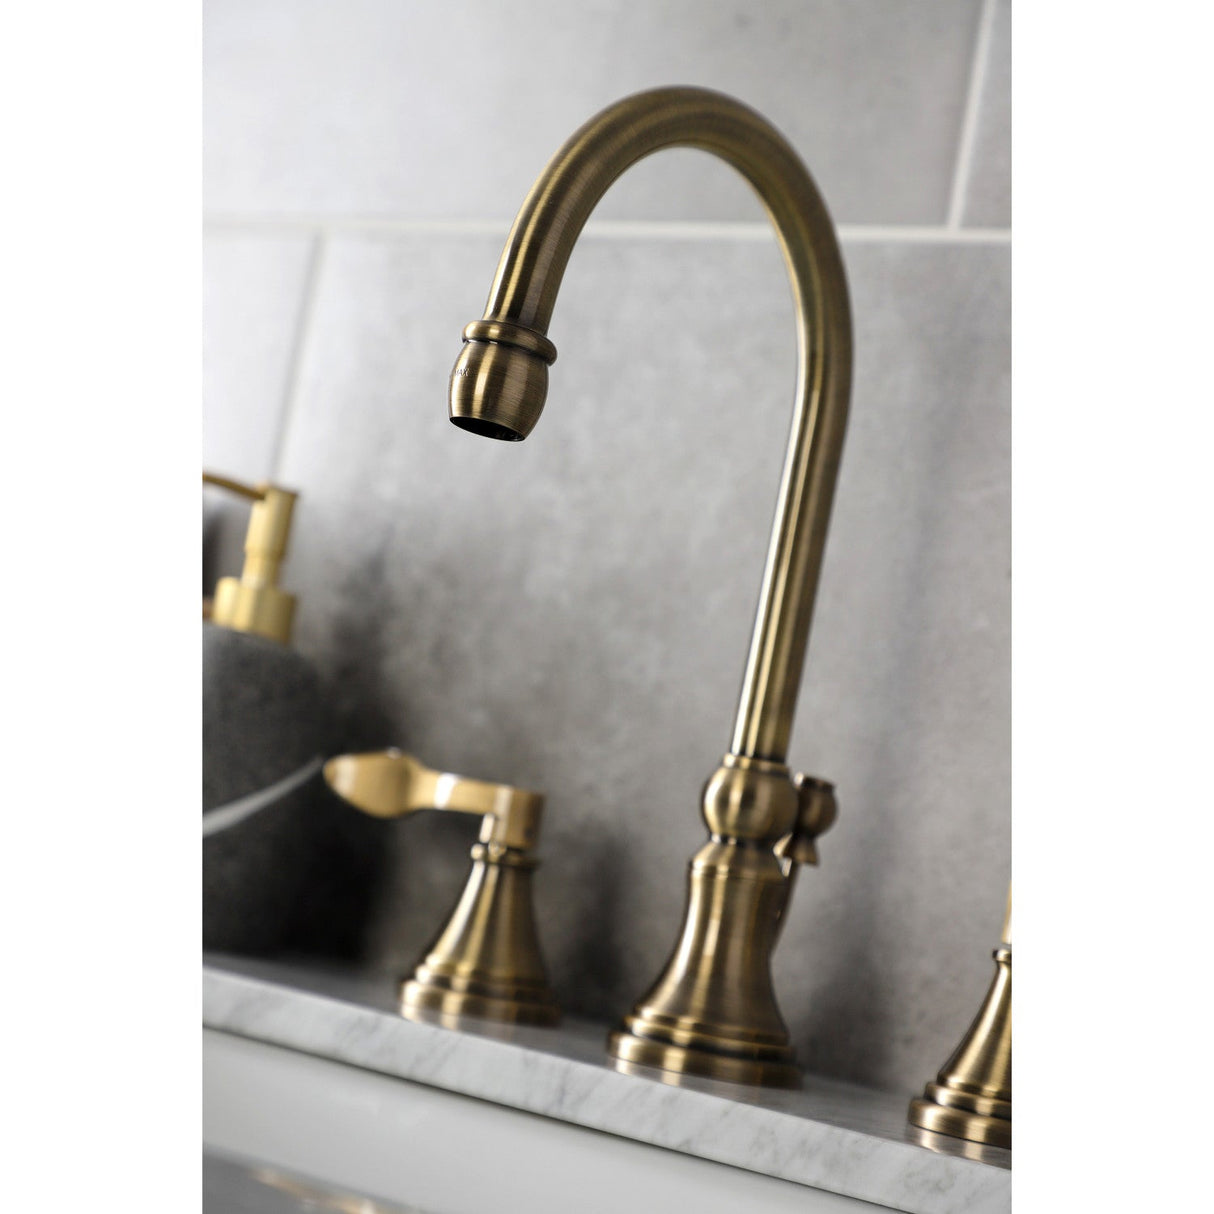 NuFrench KS2983DFL Two-Handle 3-Hole Deck Mount Widespread Bathroom Faucet with Brass Pop-Up, Antique Brass